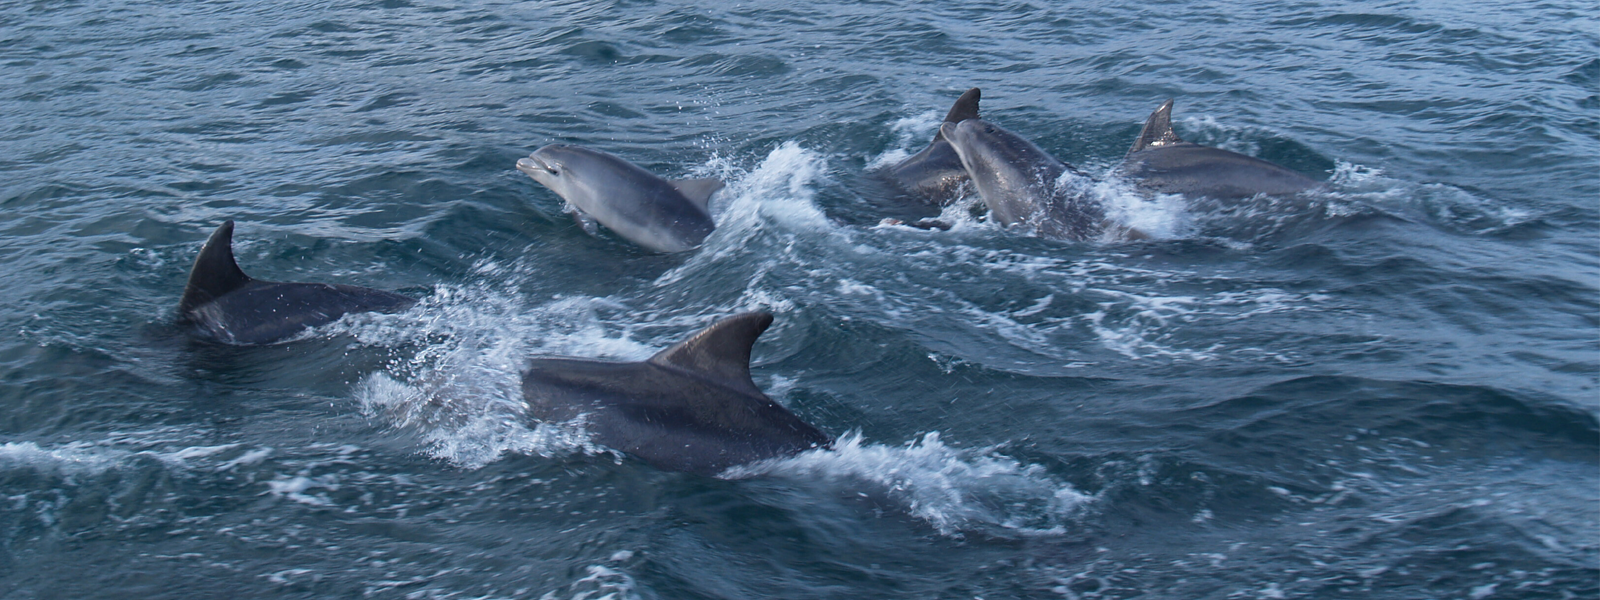 Four dolphins frolicking in the sea off the coast of the Isle of Man